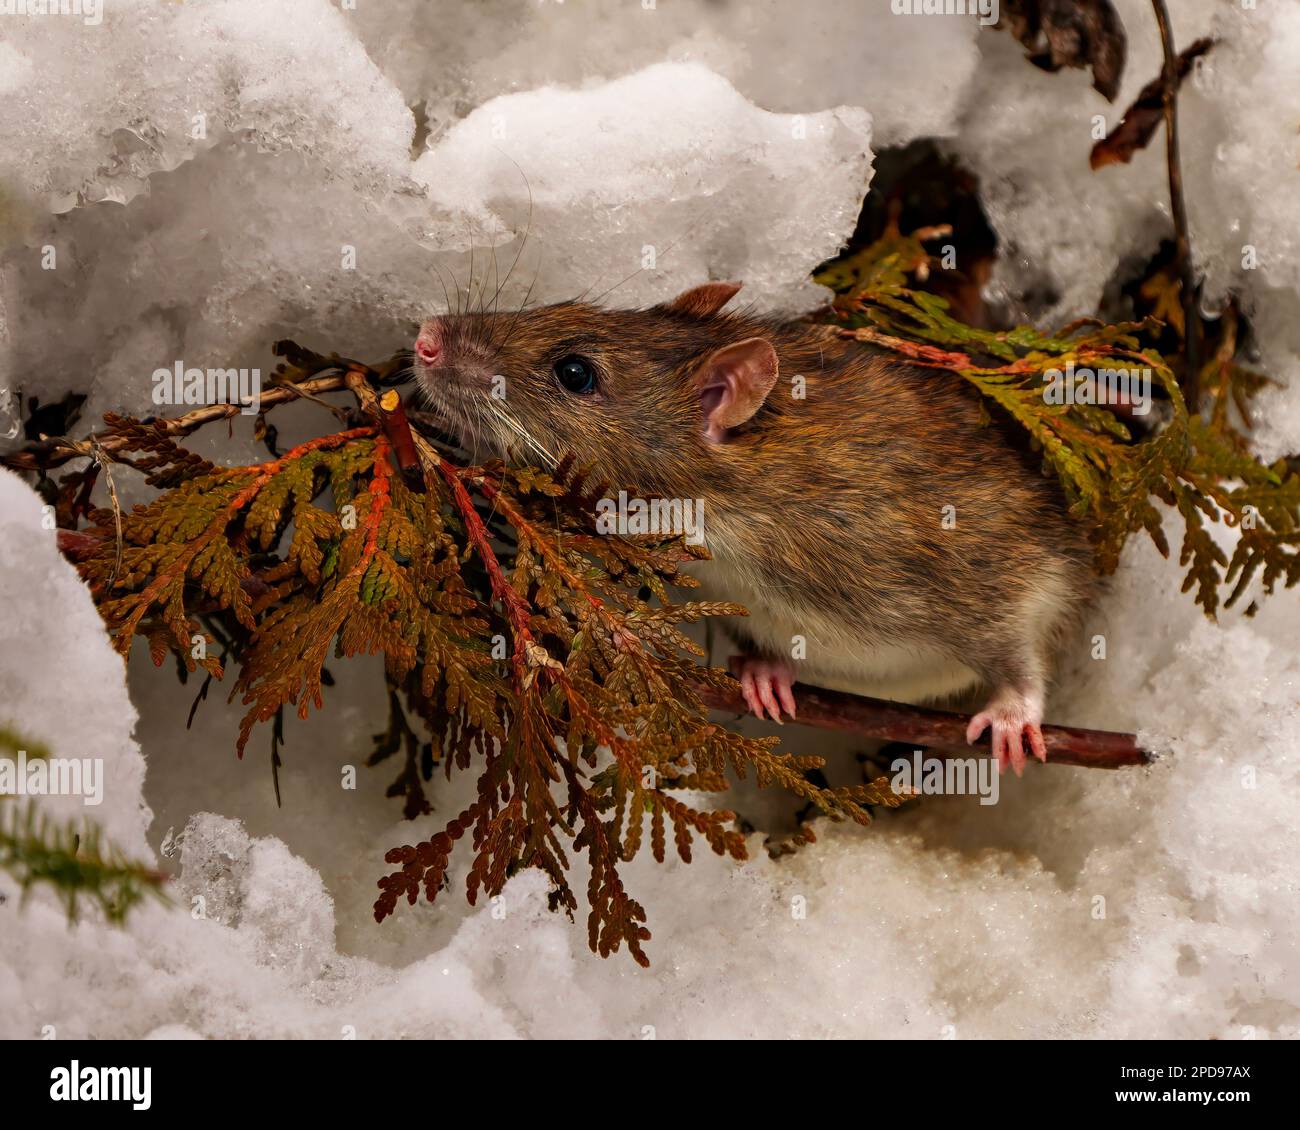 Rat head close-up front view looking at the camera and coming out of its animal den with cedar branch in the winter season in its wild environment. Stock Photo